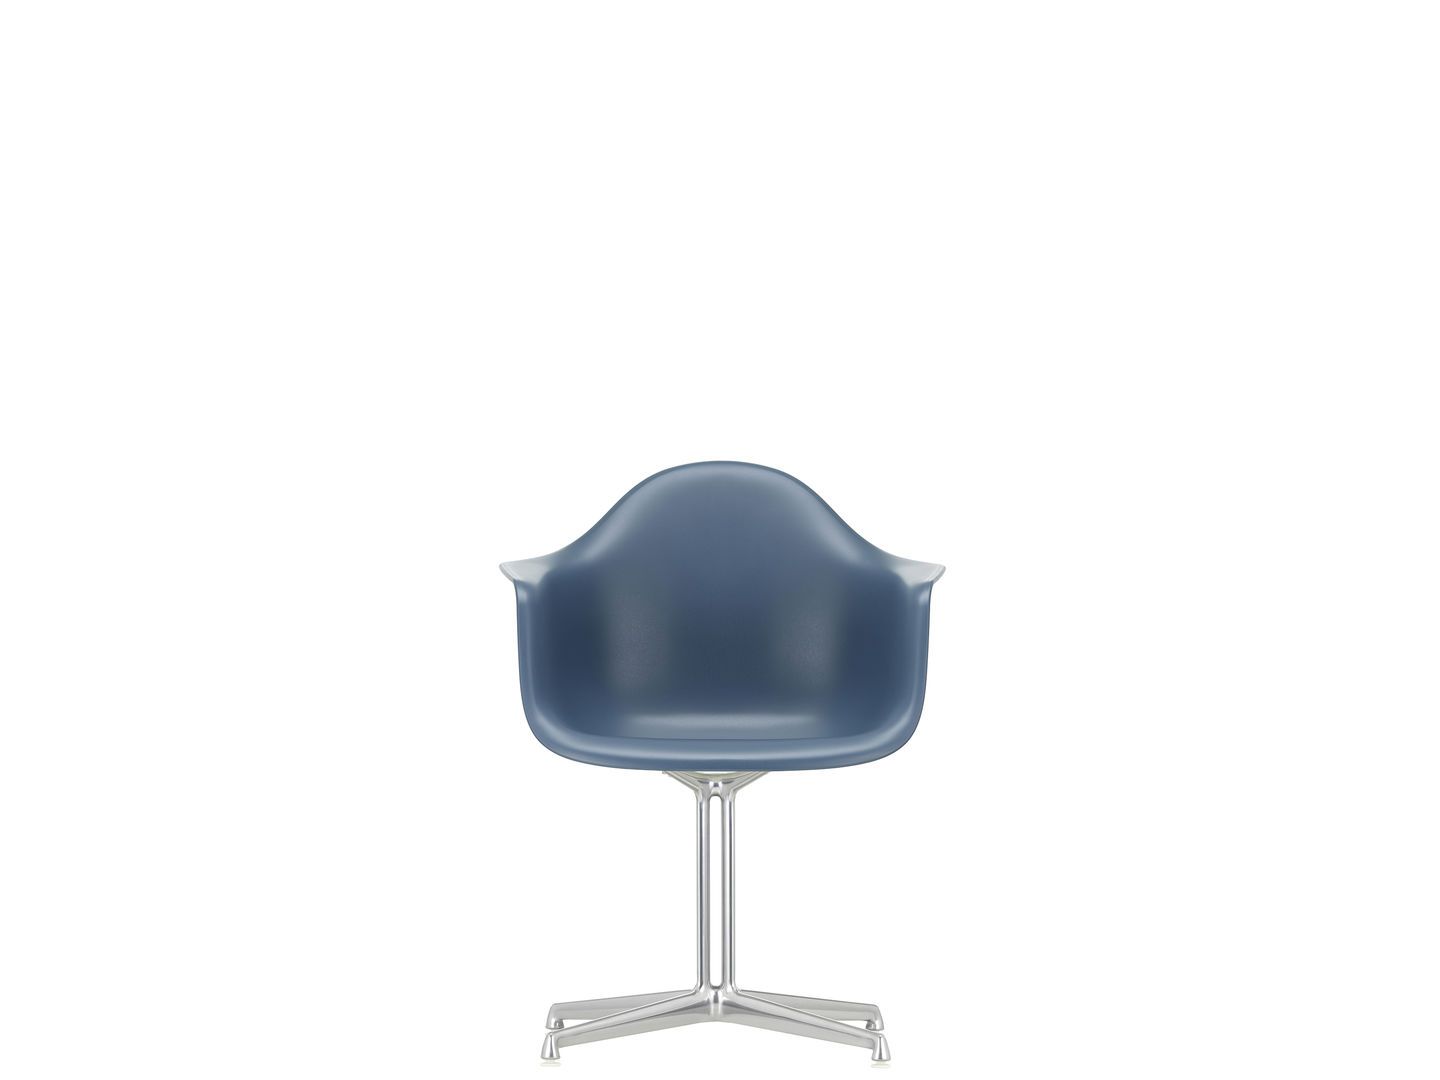 Eames Plastic Armchair DAL | One52 Furniture 